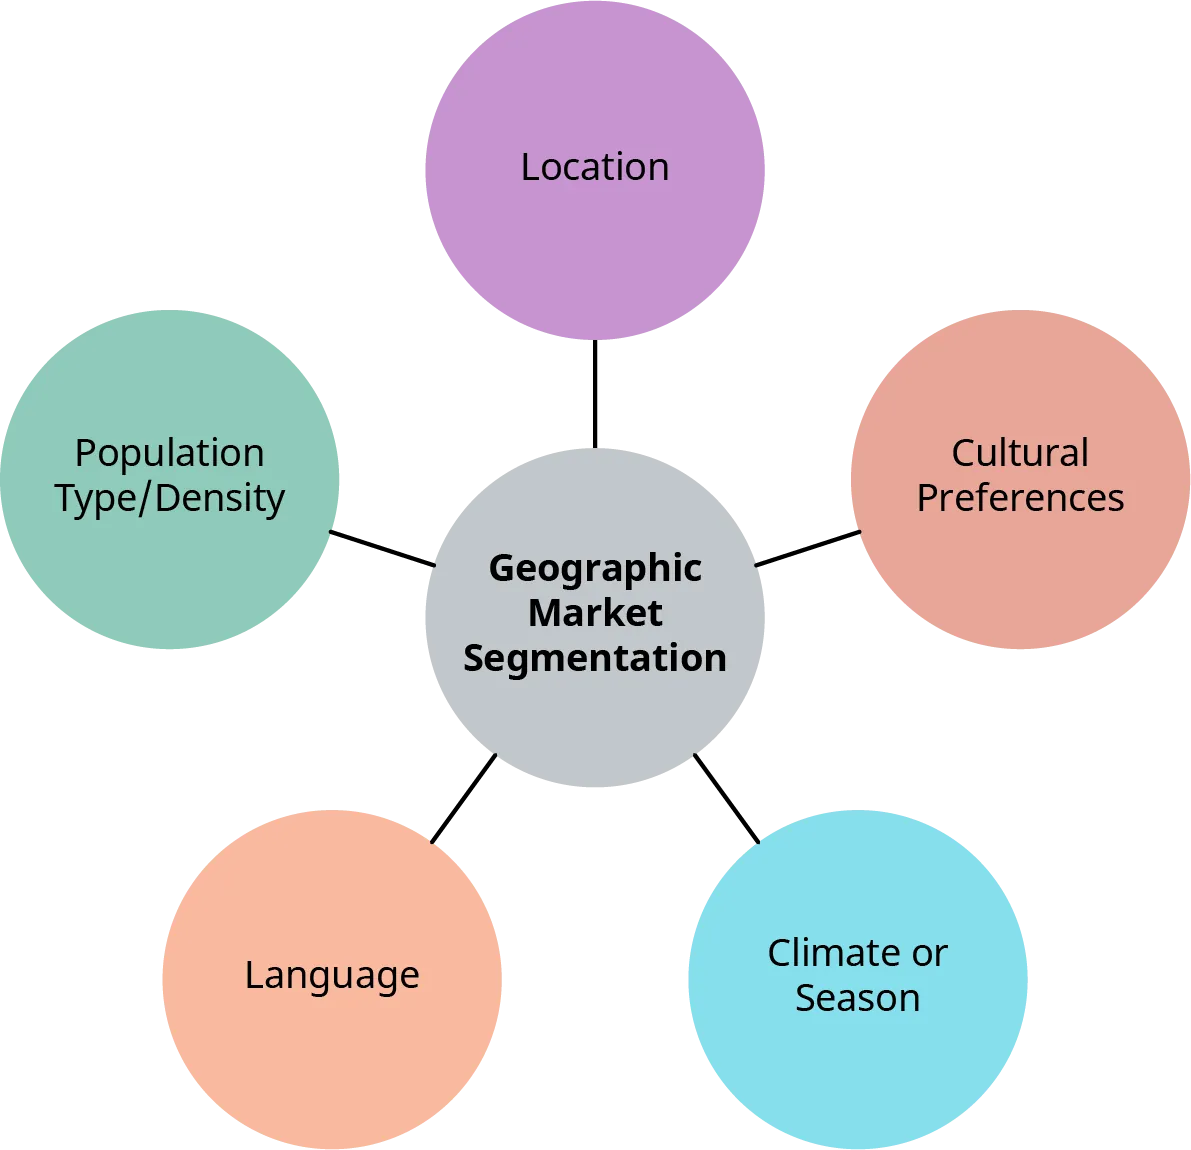 The parameters that can be used for geographic segmentation are shown as spokes coming off a circle in the center labelled geographic market segmentation. Starting at the top and going clockwise, the parameters are location, cultural preferences, climate or season, language, and population type/density.